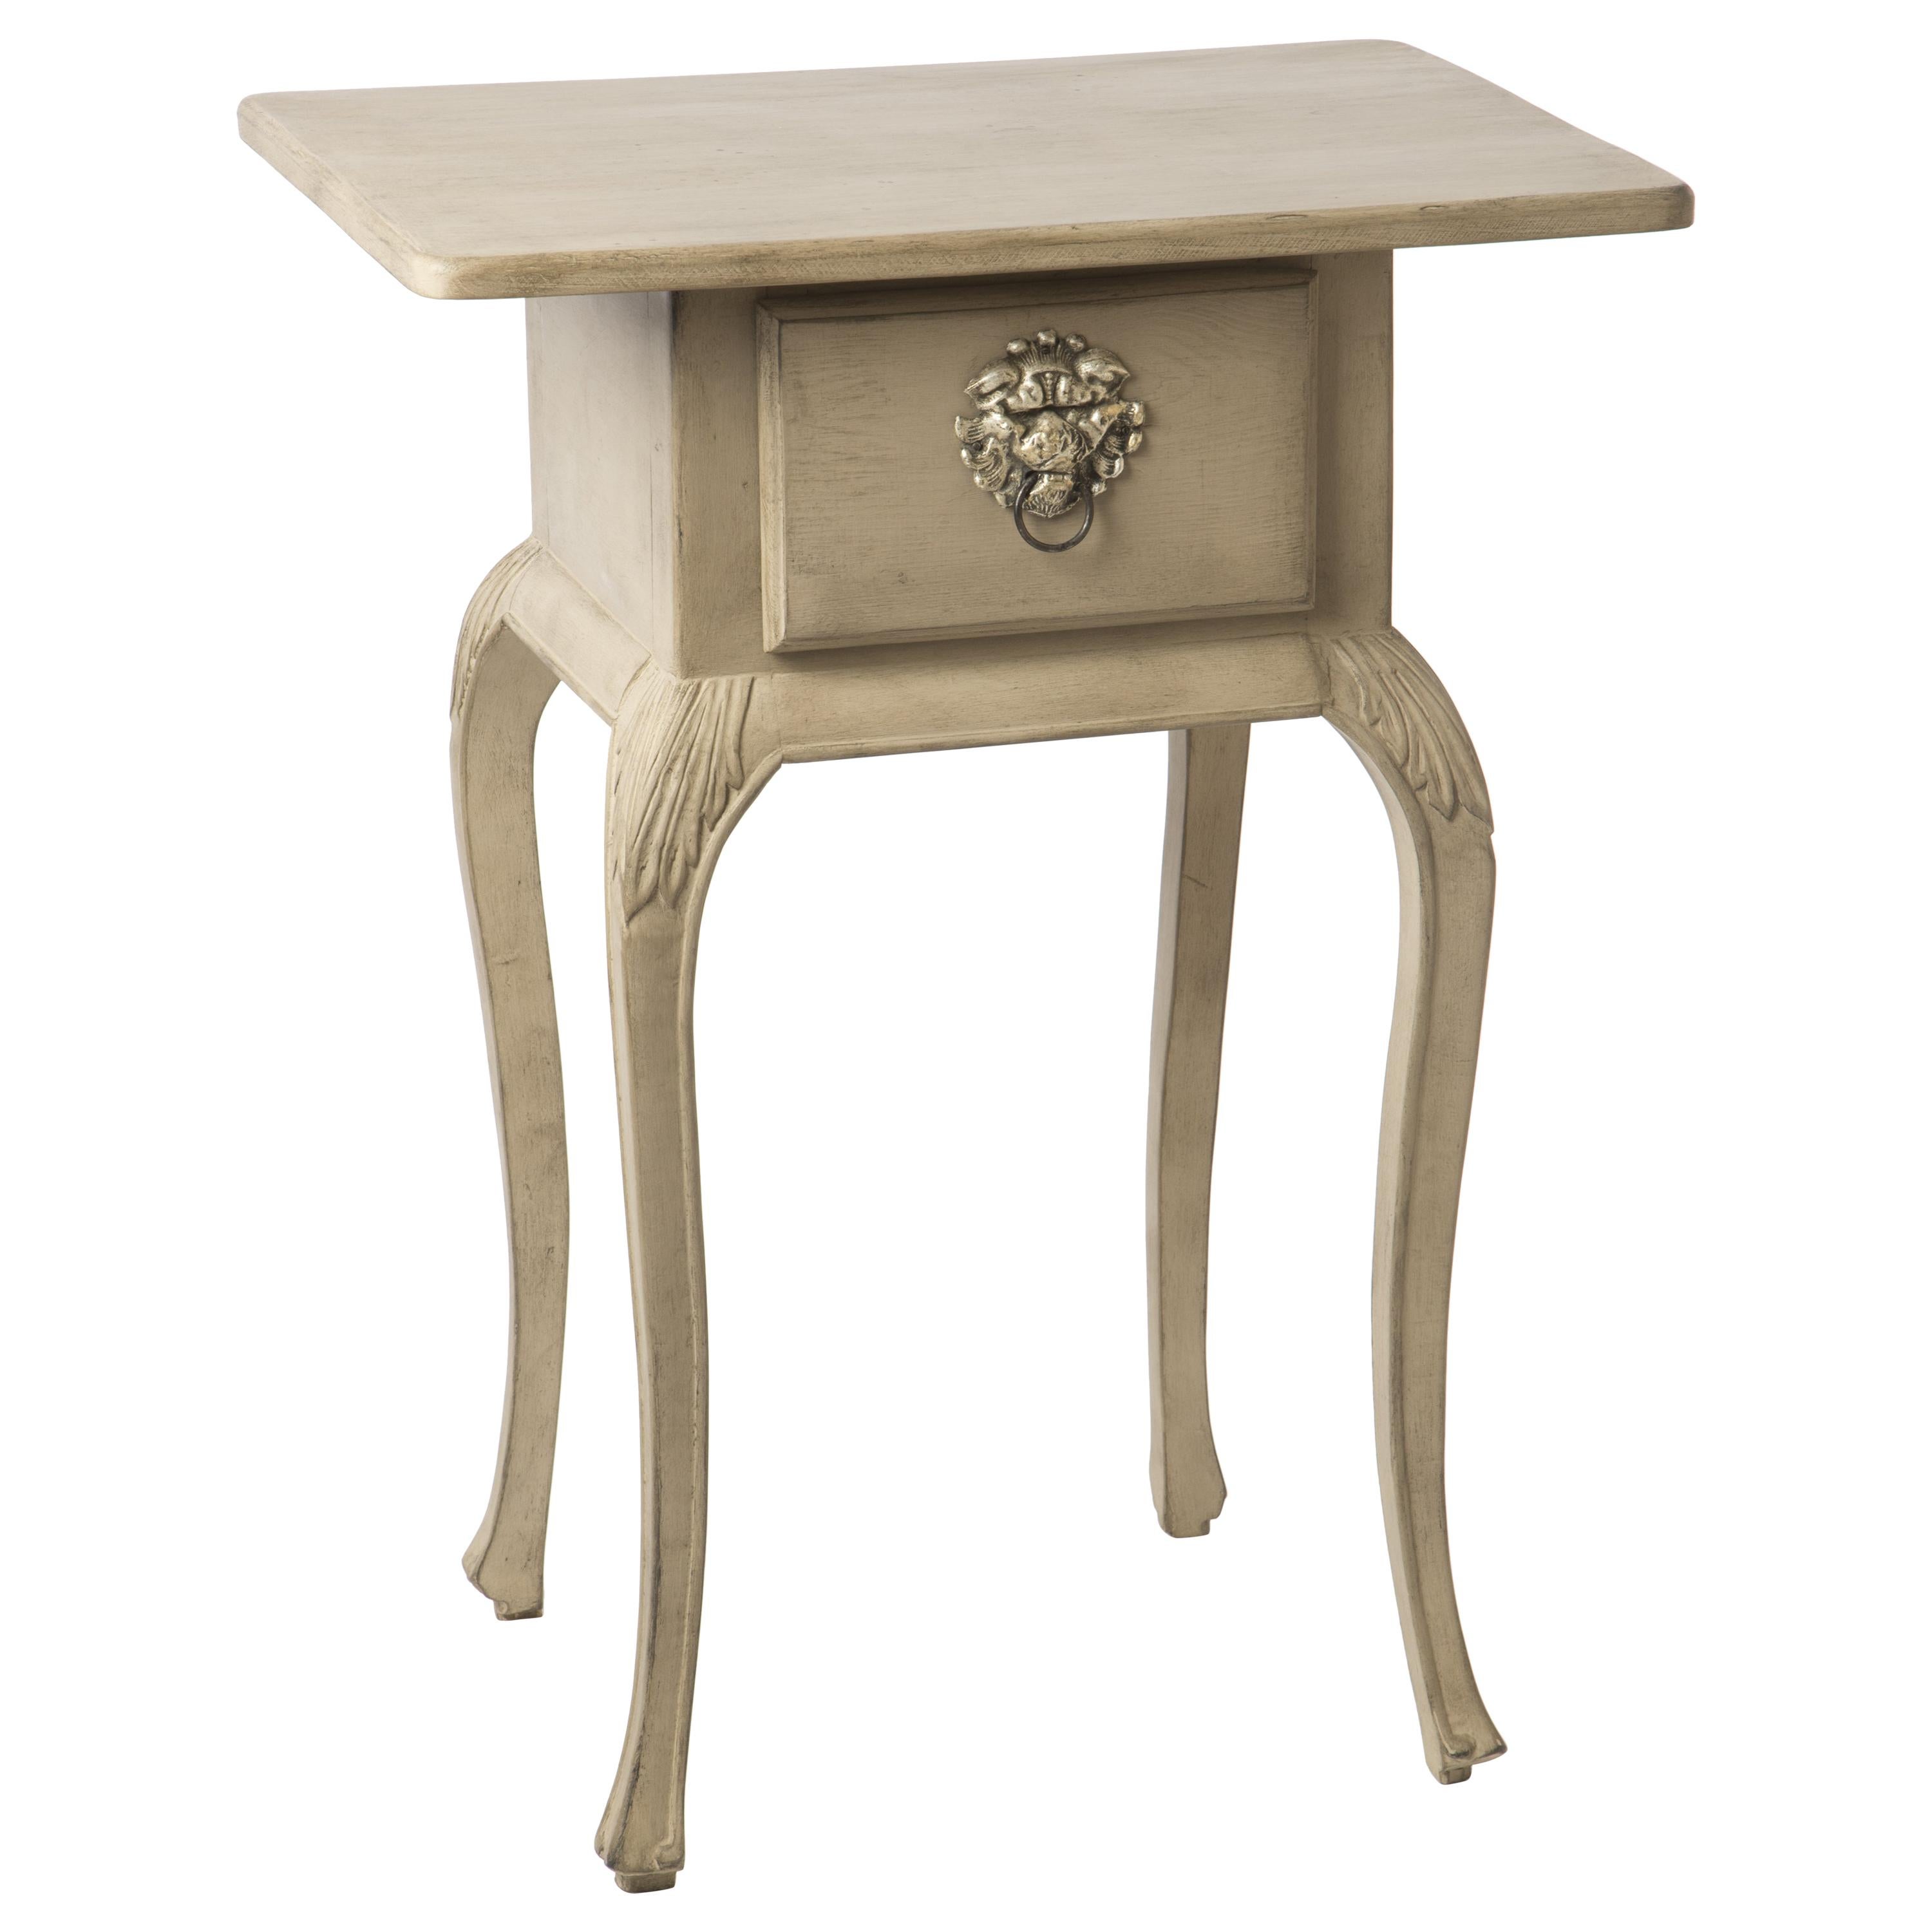 Gustavian Styled Side Table with Drawer and Curved Legs